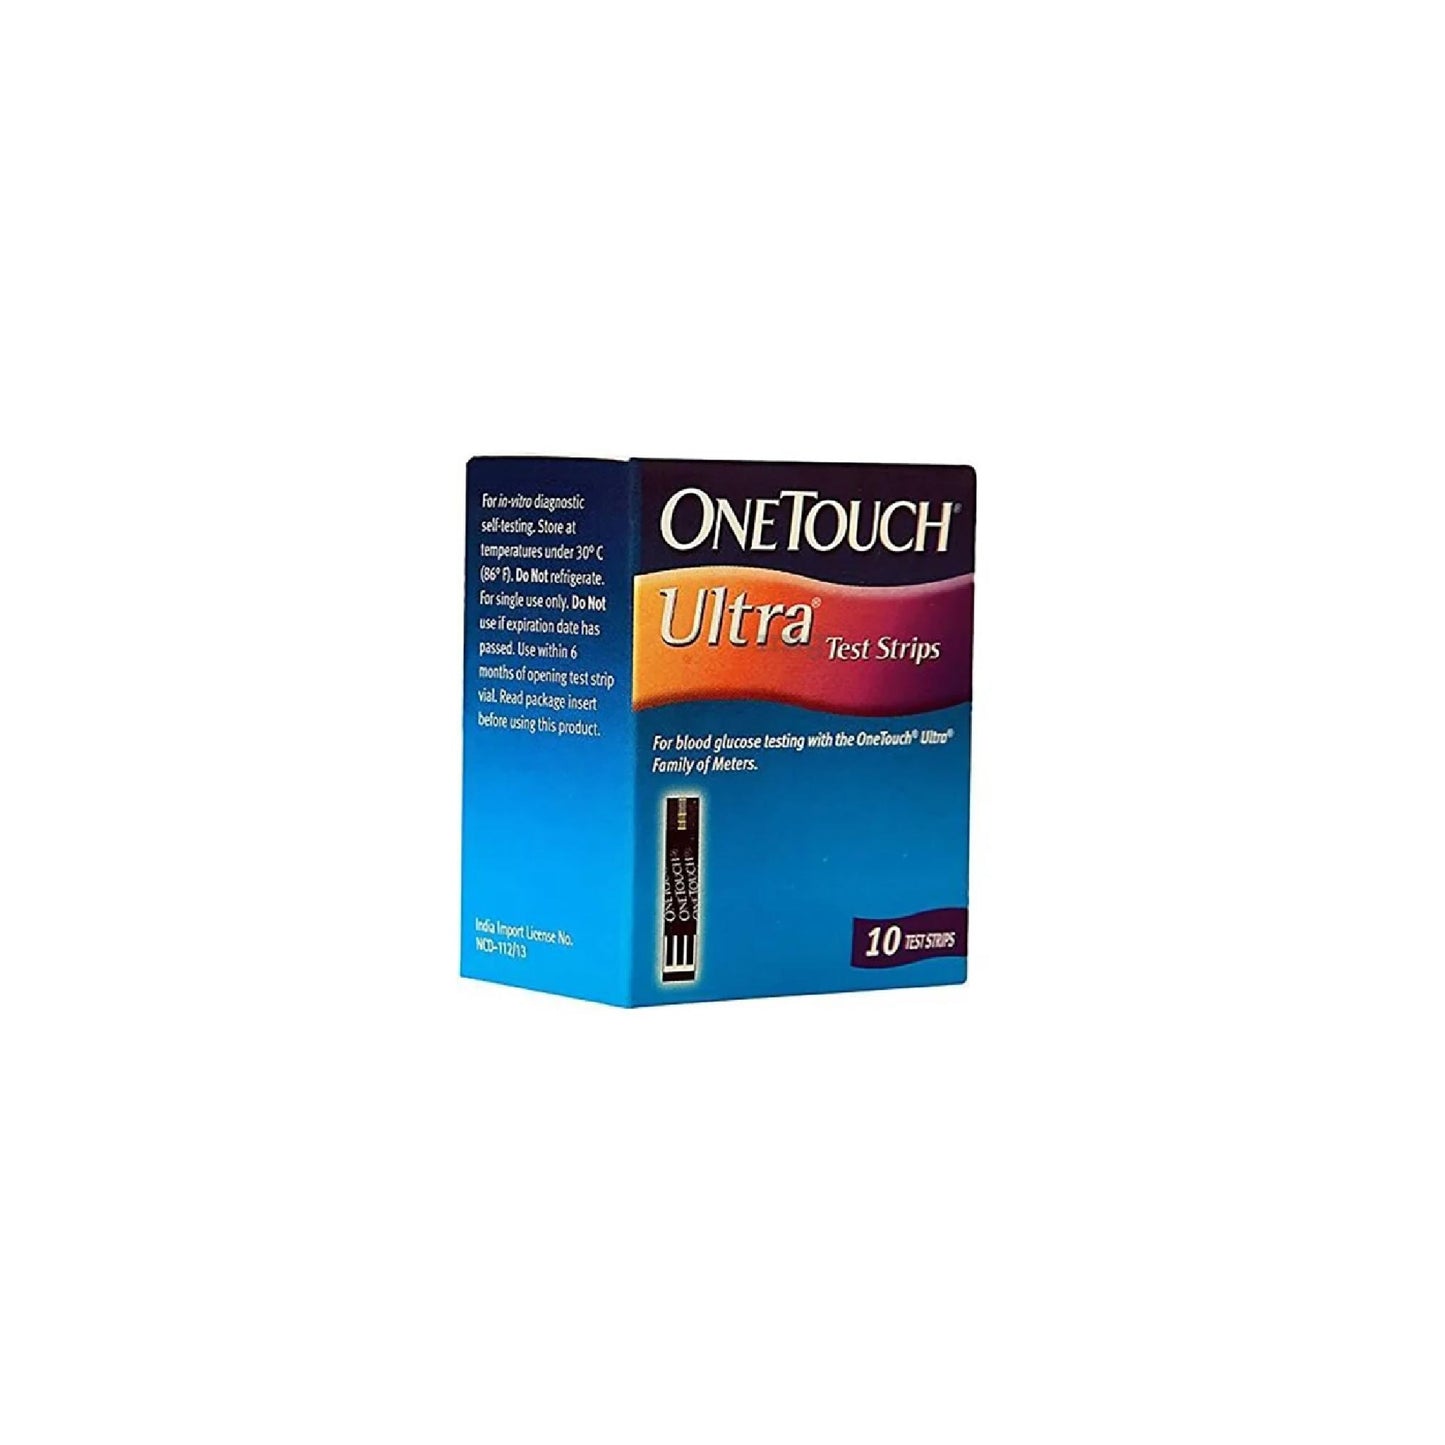 OneTouch Ultra Test Strips, 10's